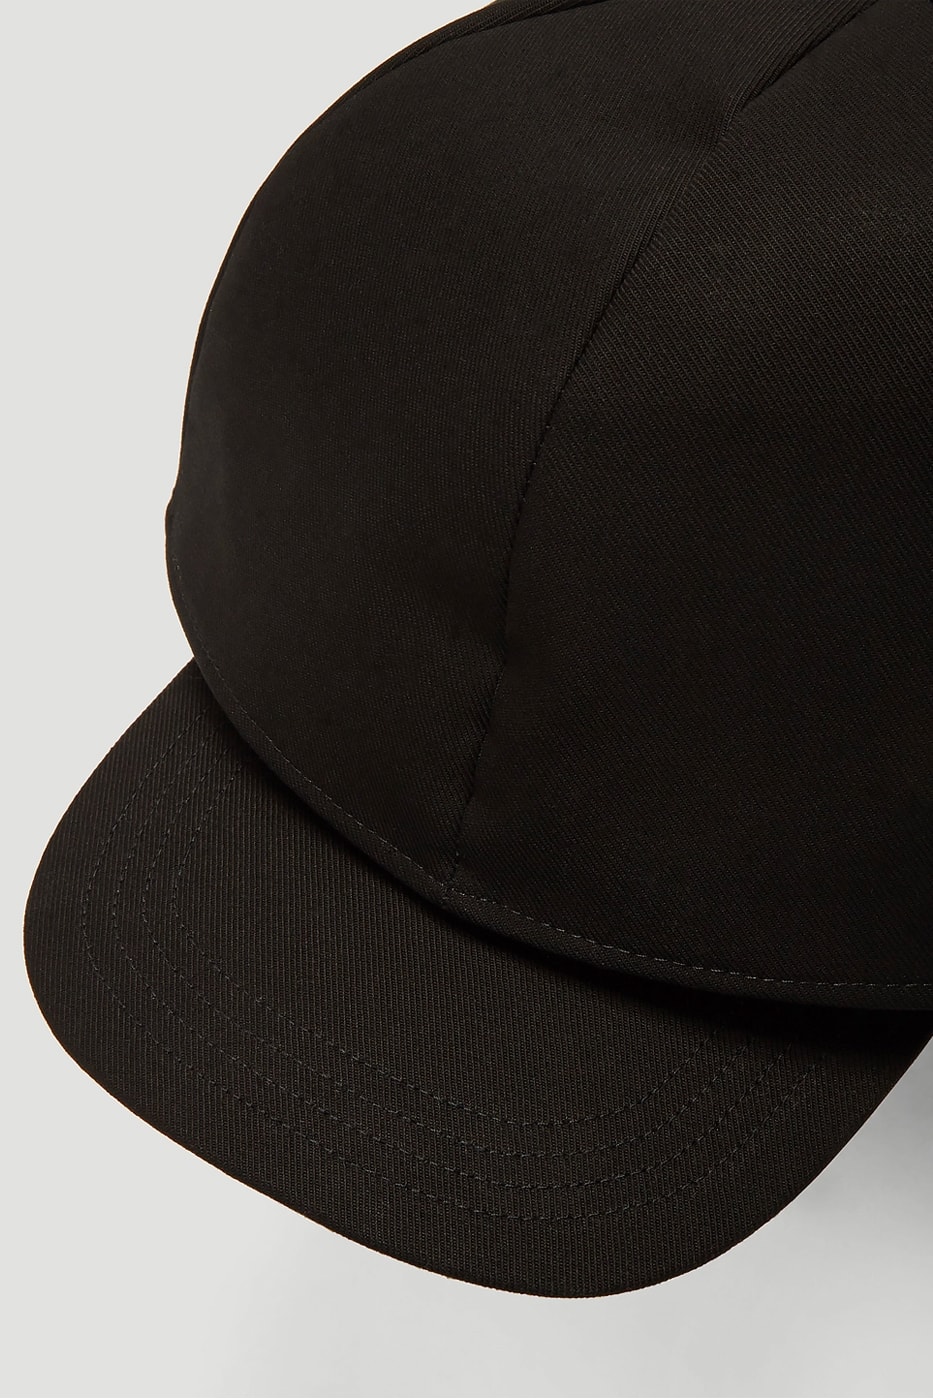 Raf Simons Strap Fastening Double Cap Release Info black hats accessories ln-cc buy now drop date price canvas six 6 panel made in italy 